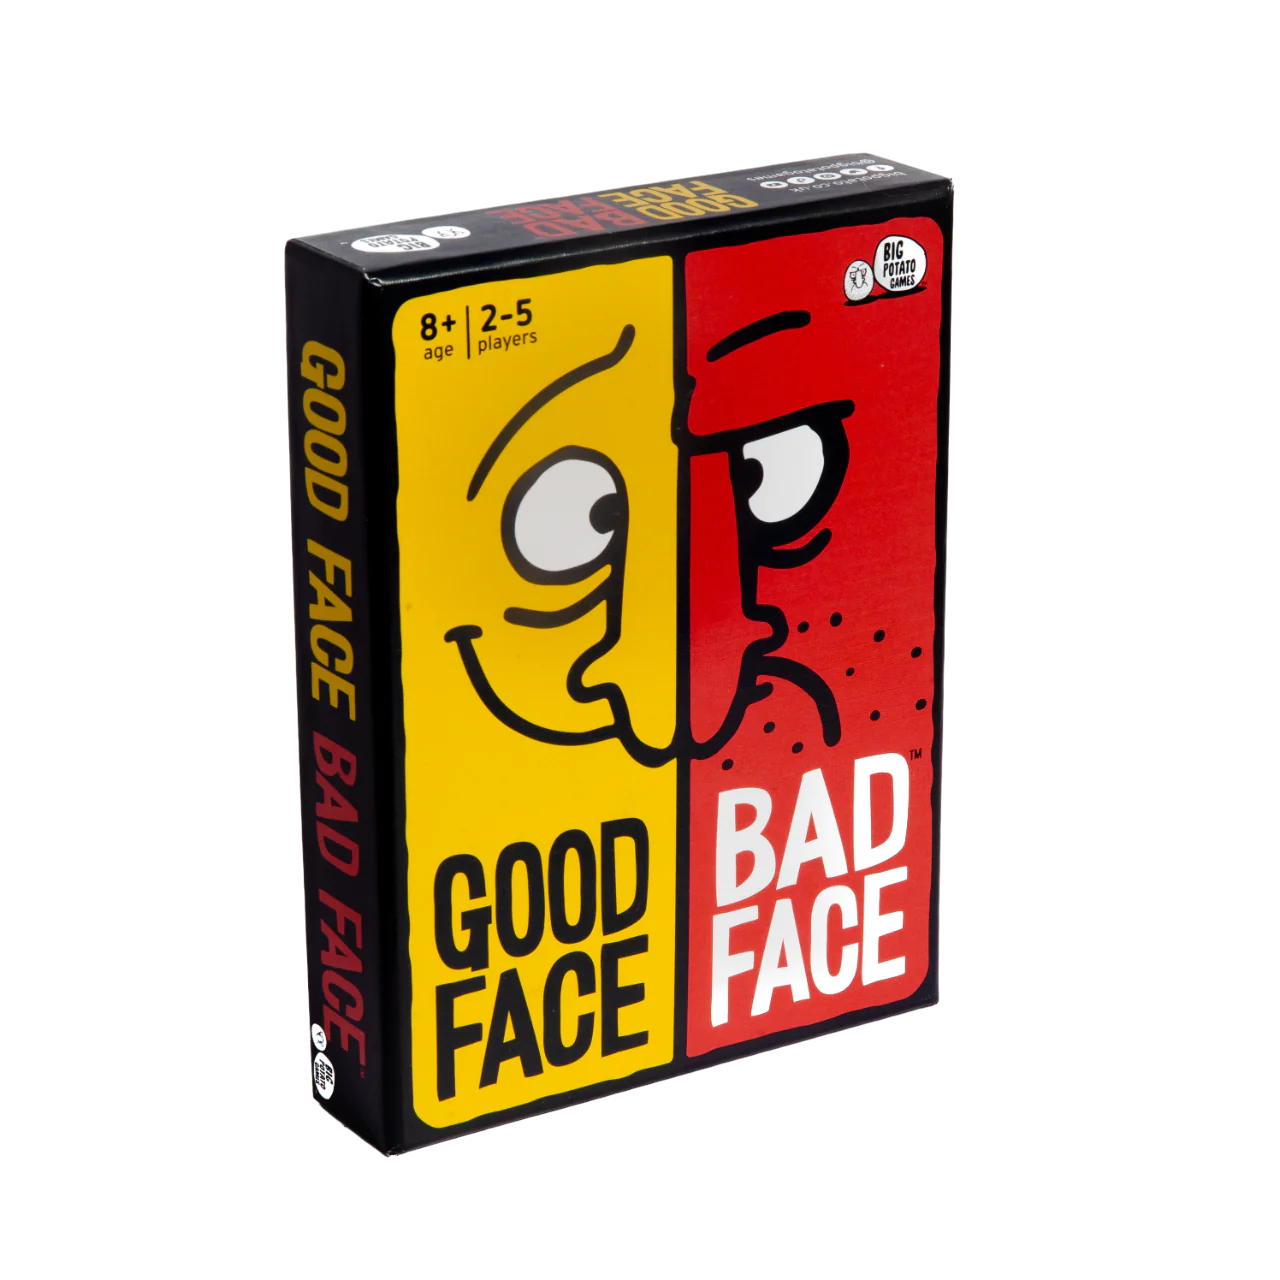 Good Face Bad Face - Loaded Dice